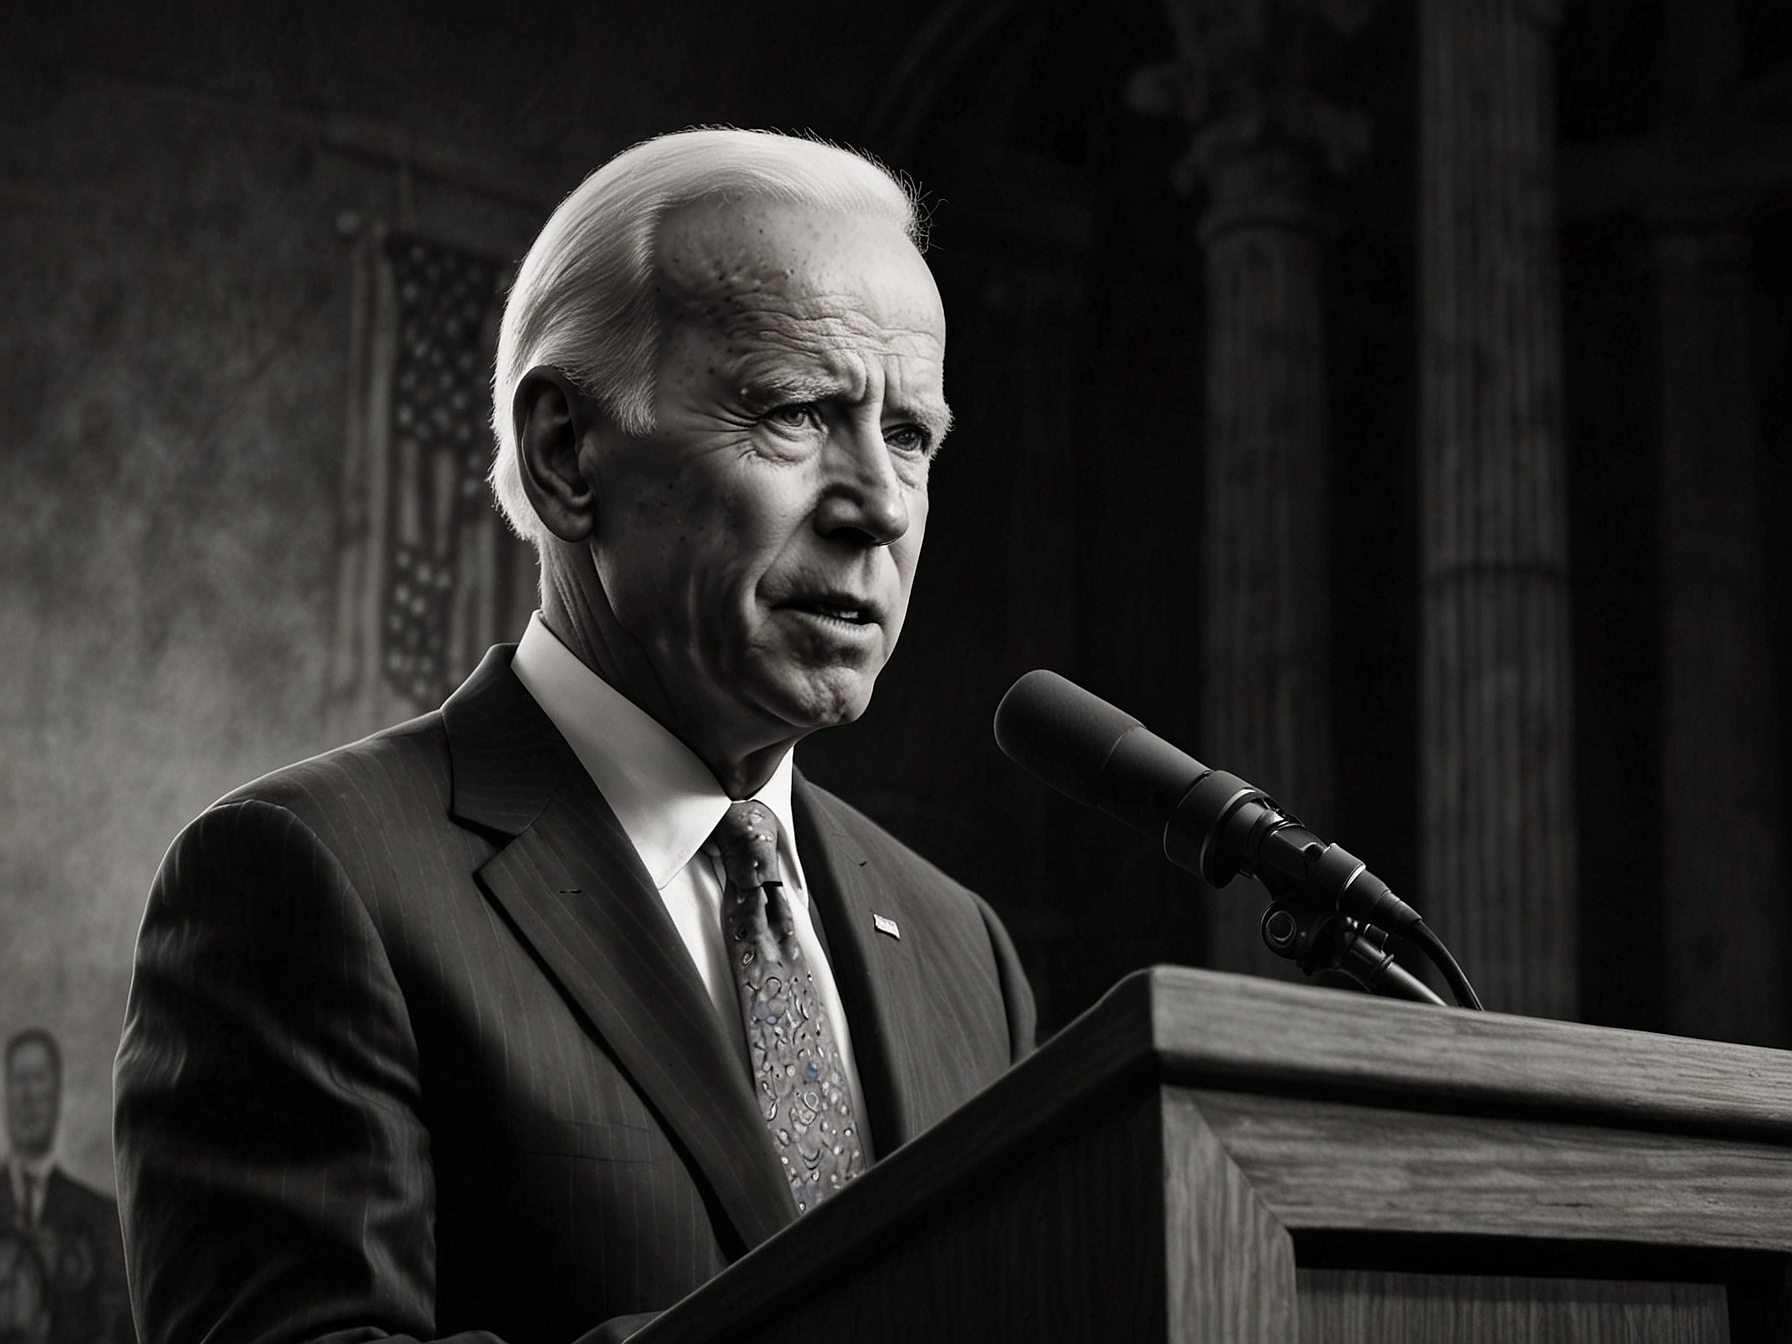 A photo of President Joe Biden speaking at a podium, looking determined and confident, which represents his commitment to staying the course despite recent debate criticisms.